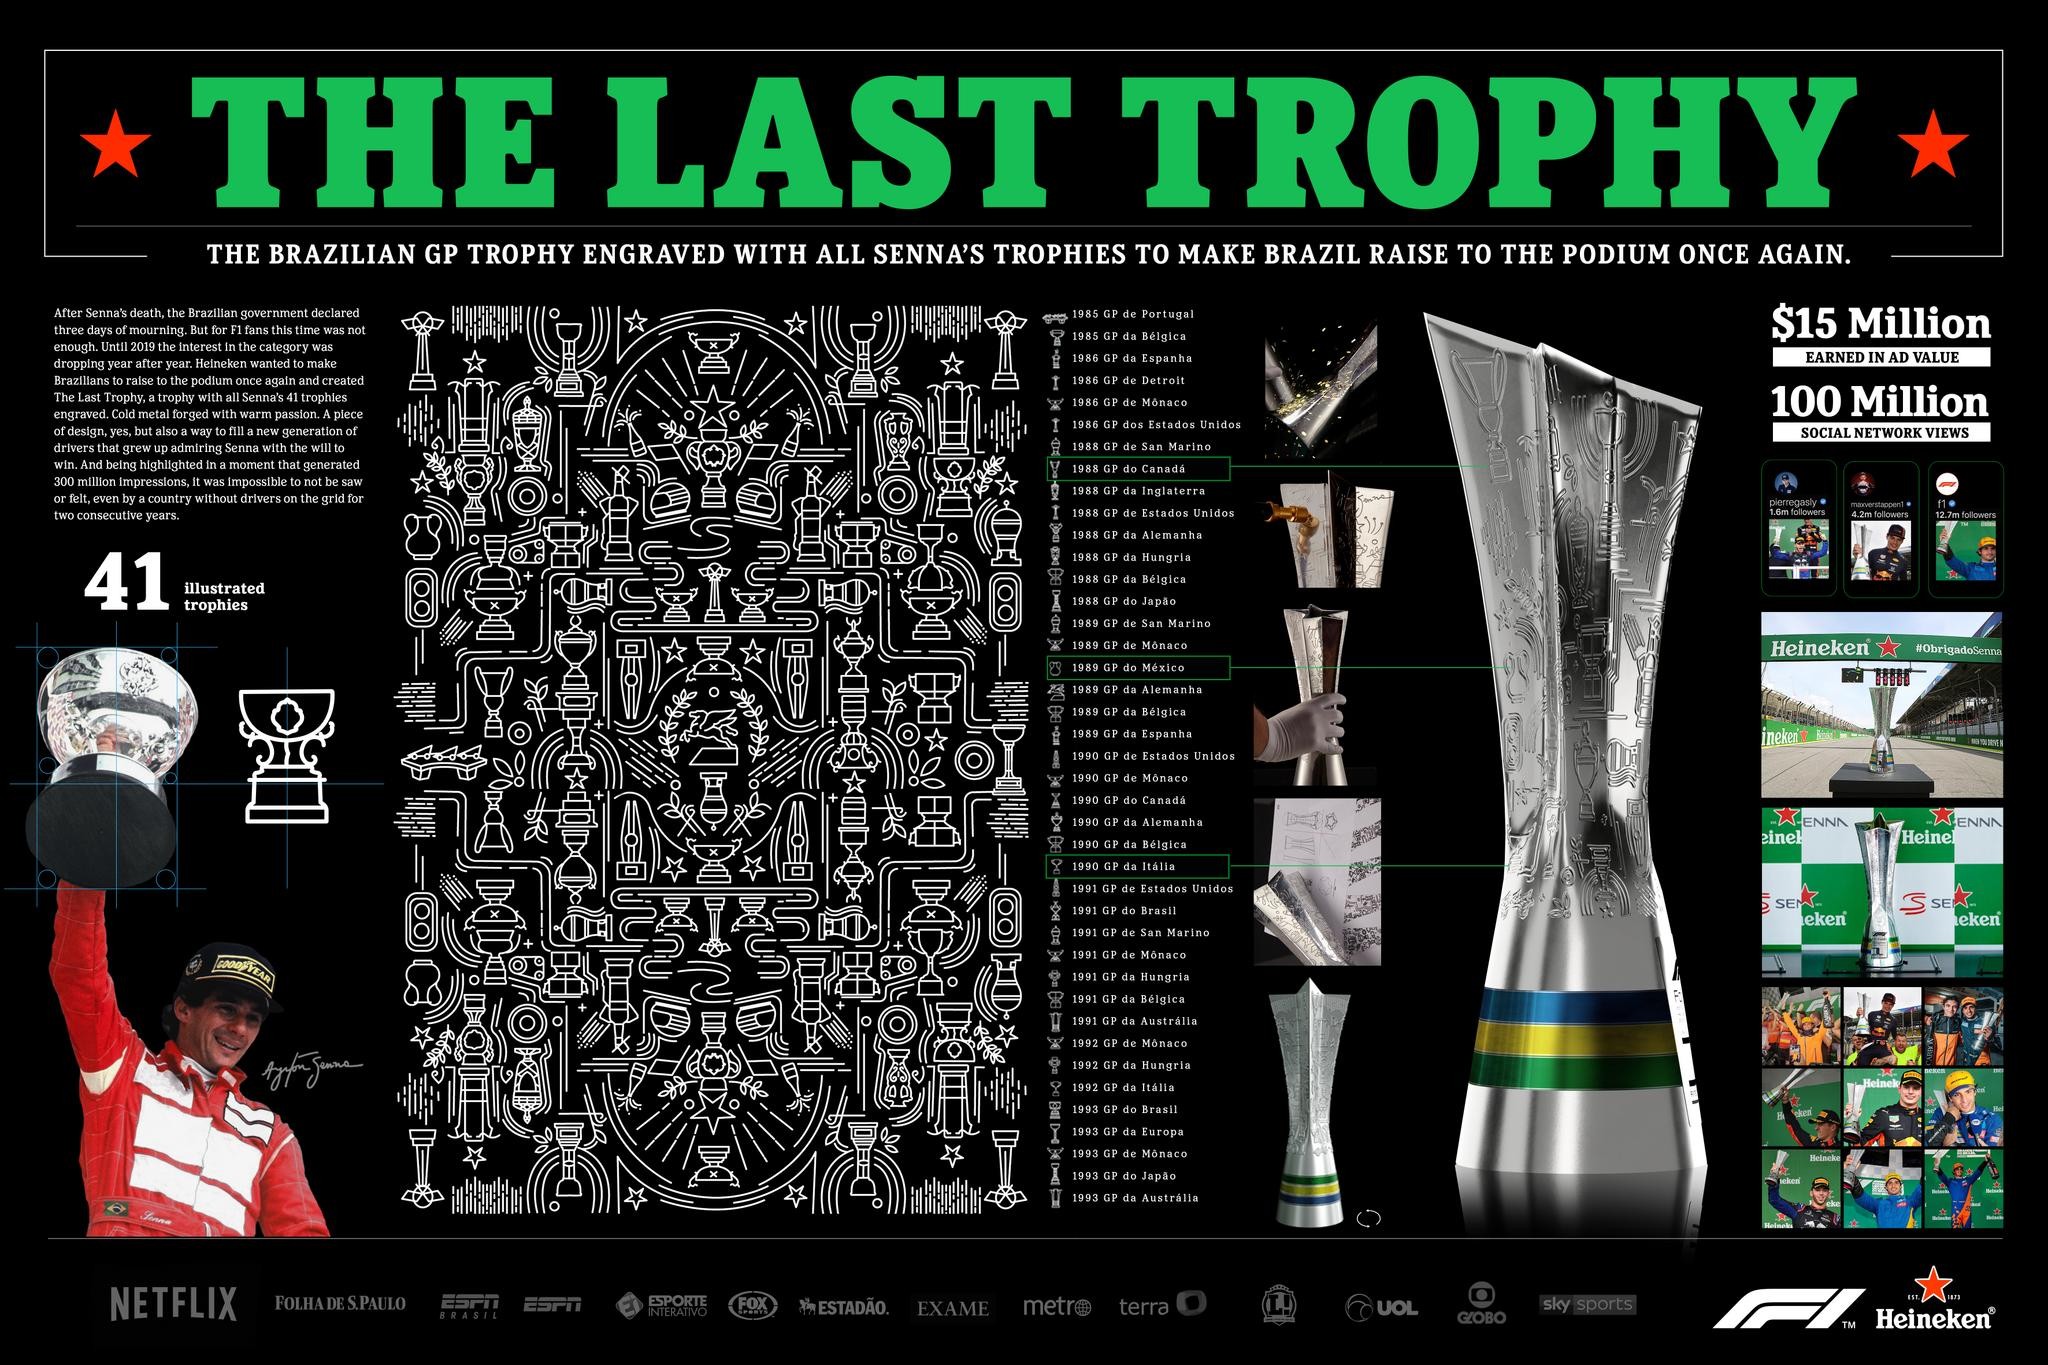 The Last Trophy